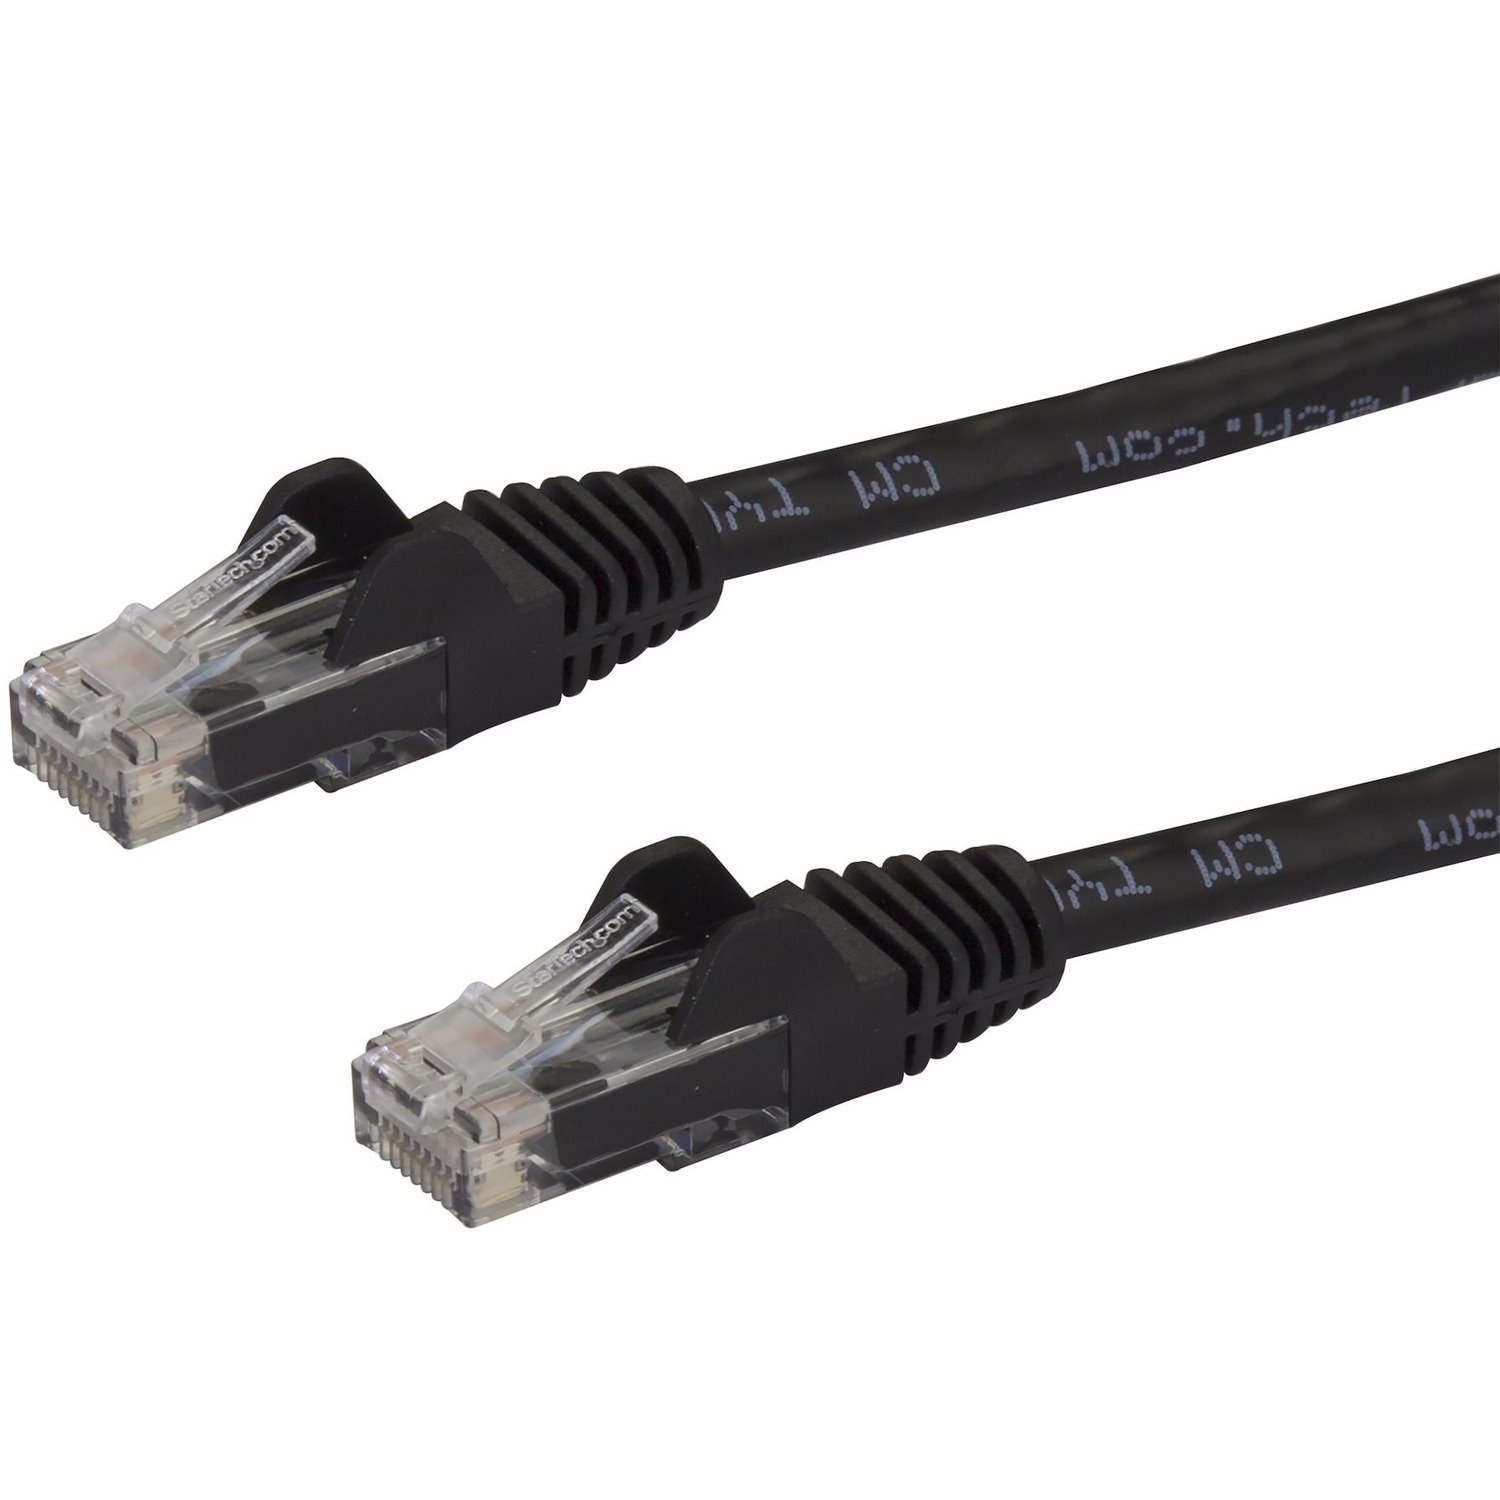 StarTech.com 12ft CAT6 Ethernet Cable - Black Snagless Gigabit - 100W PoE UTP 650MHz Category 6 Patch Cord UL Certified Wiring/TIA